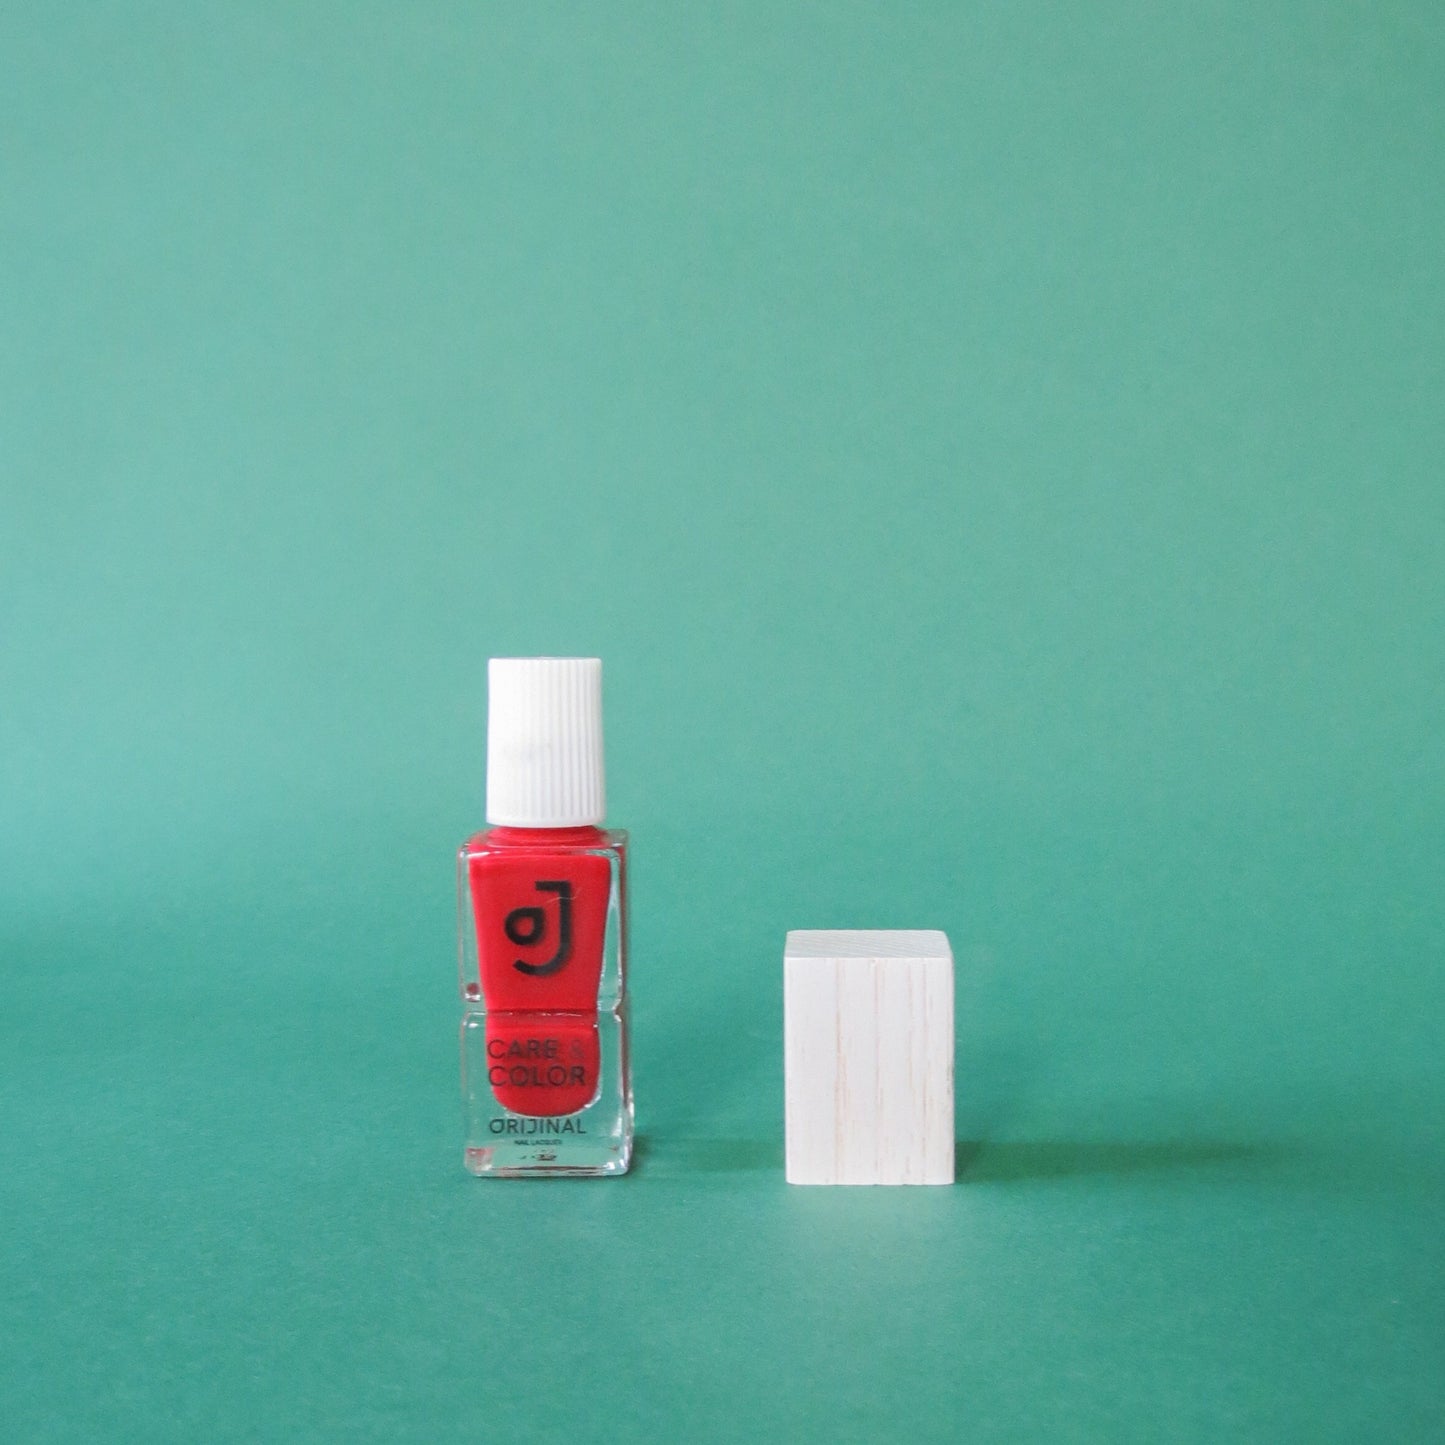 Vernis consigné rouge